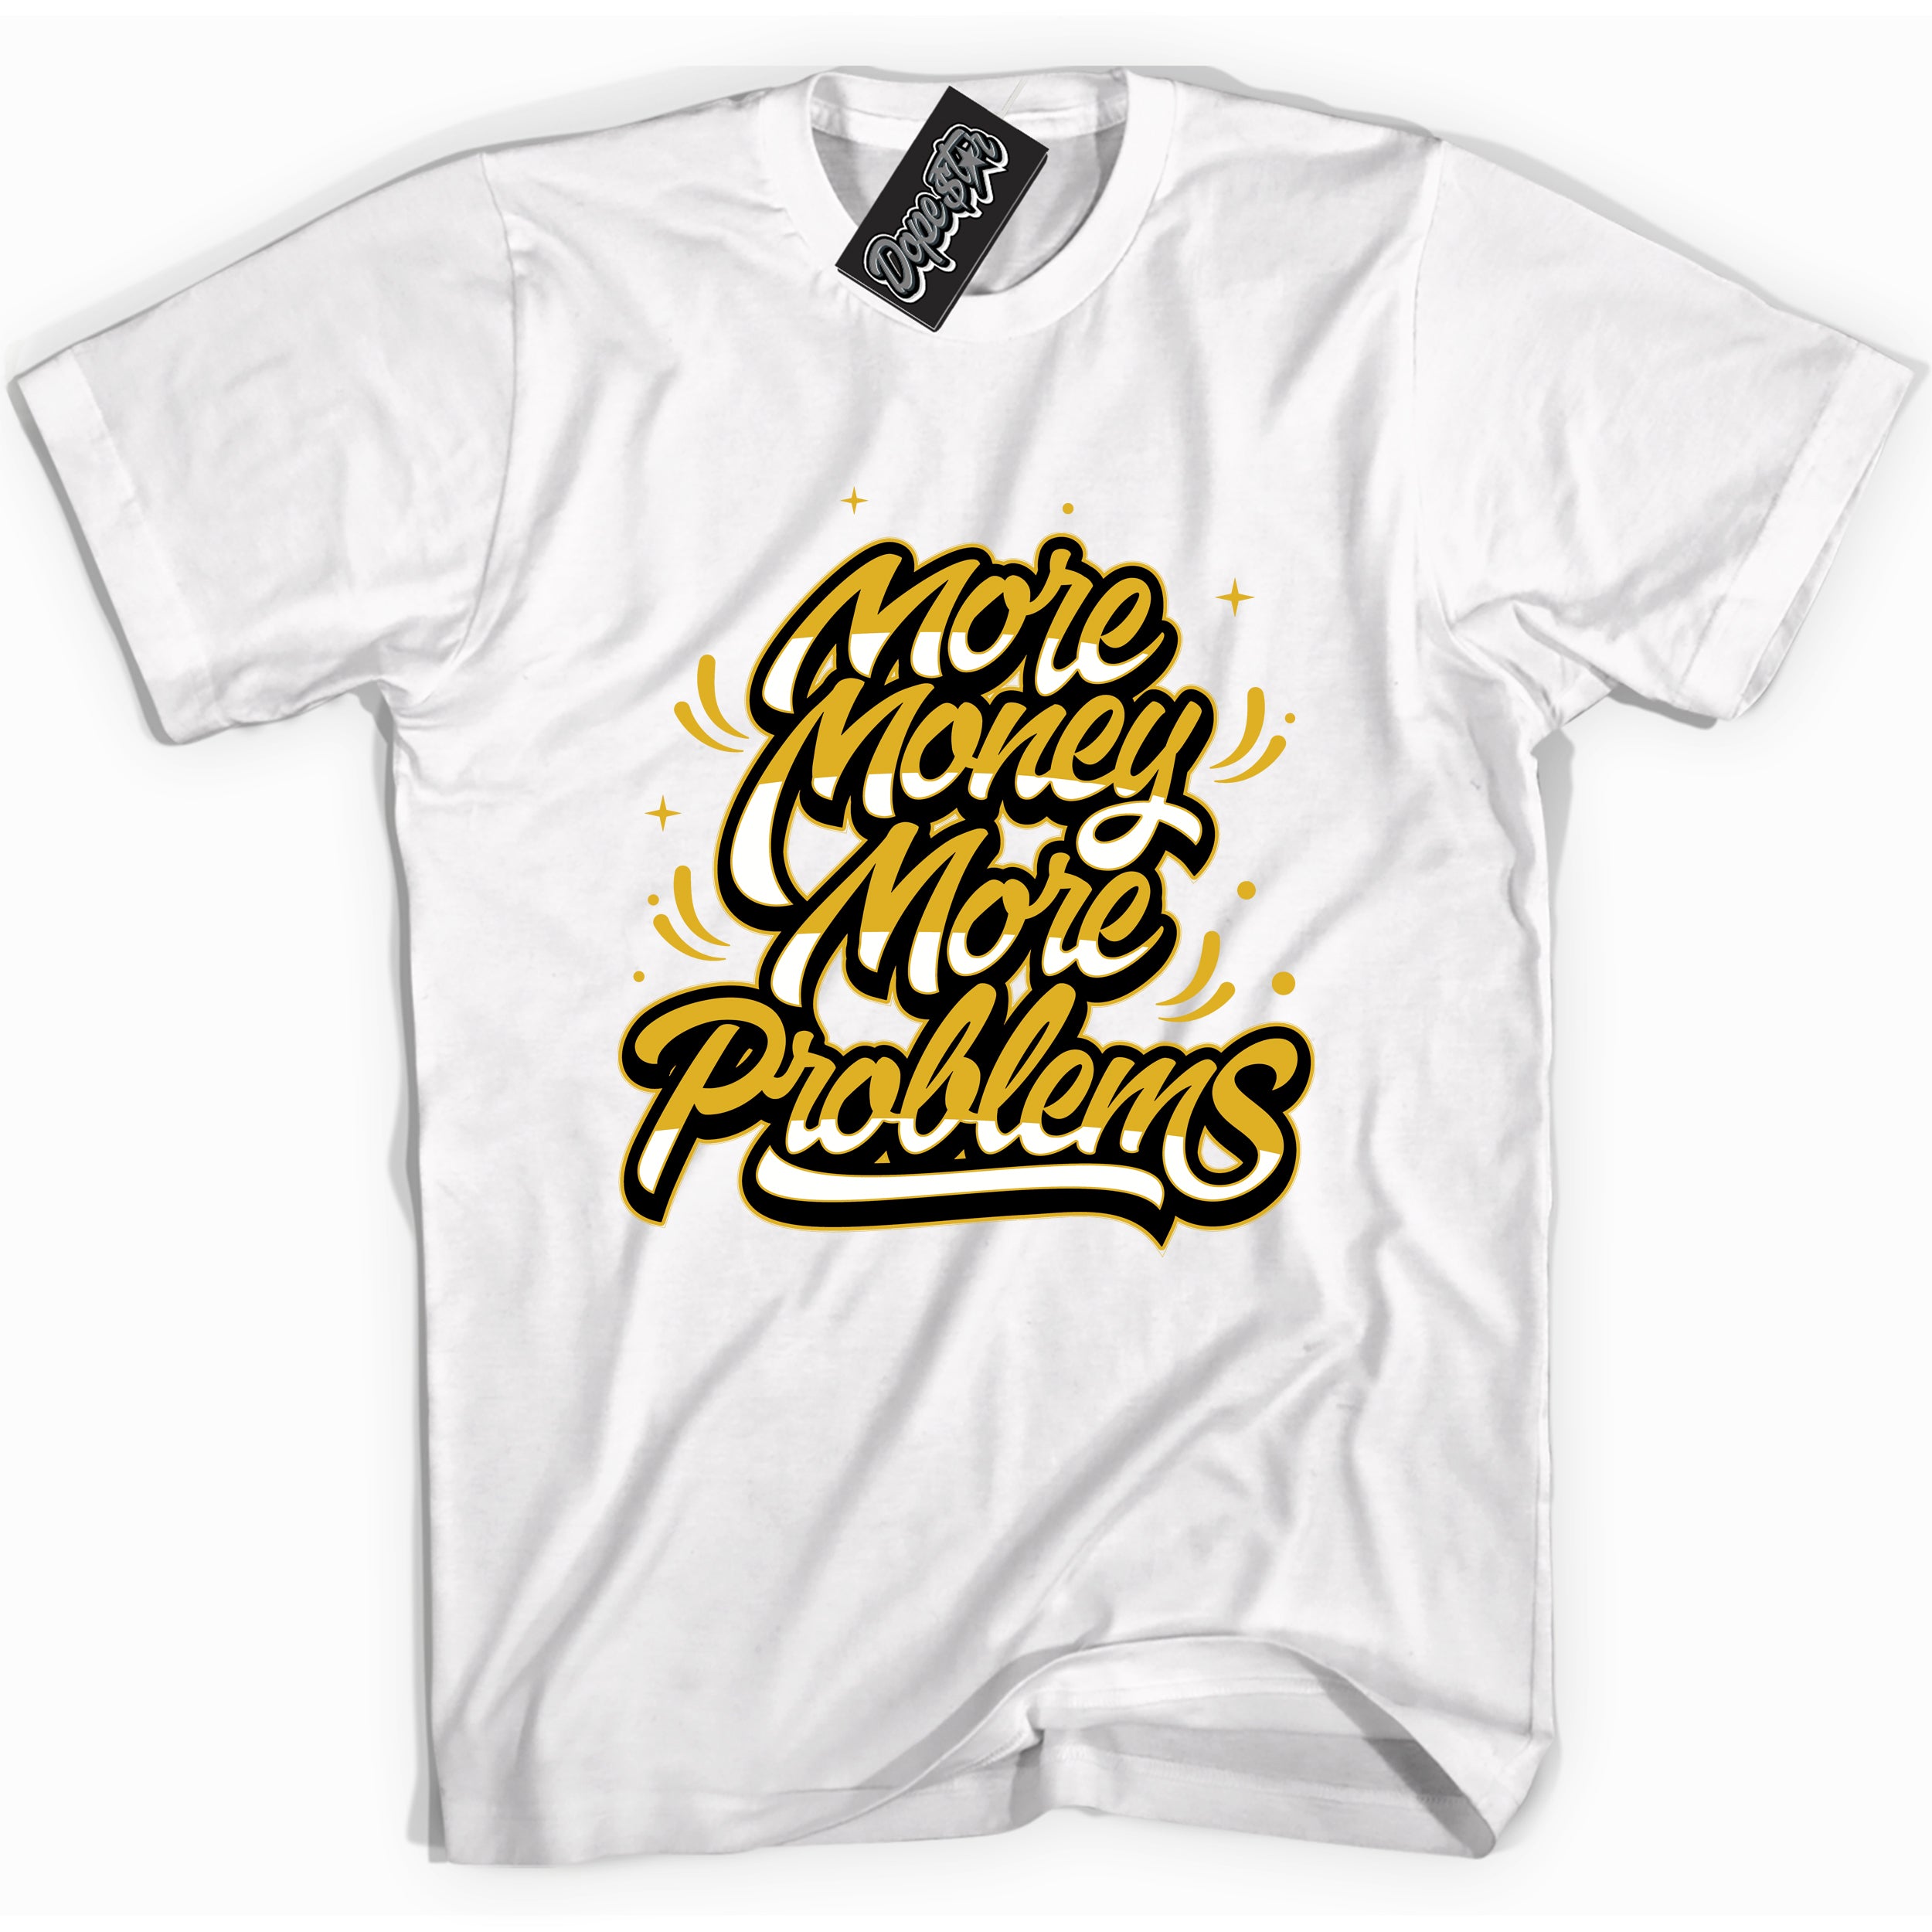 Cool White Shirt With More Money More Problems design That Perfectly Matches AIR JORDAN 6 RETRO YELLOW OCHRE Sneakers.